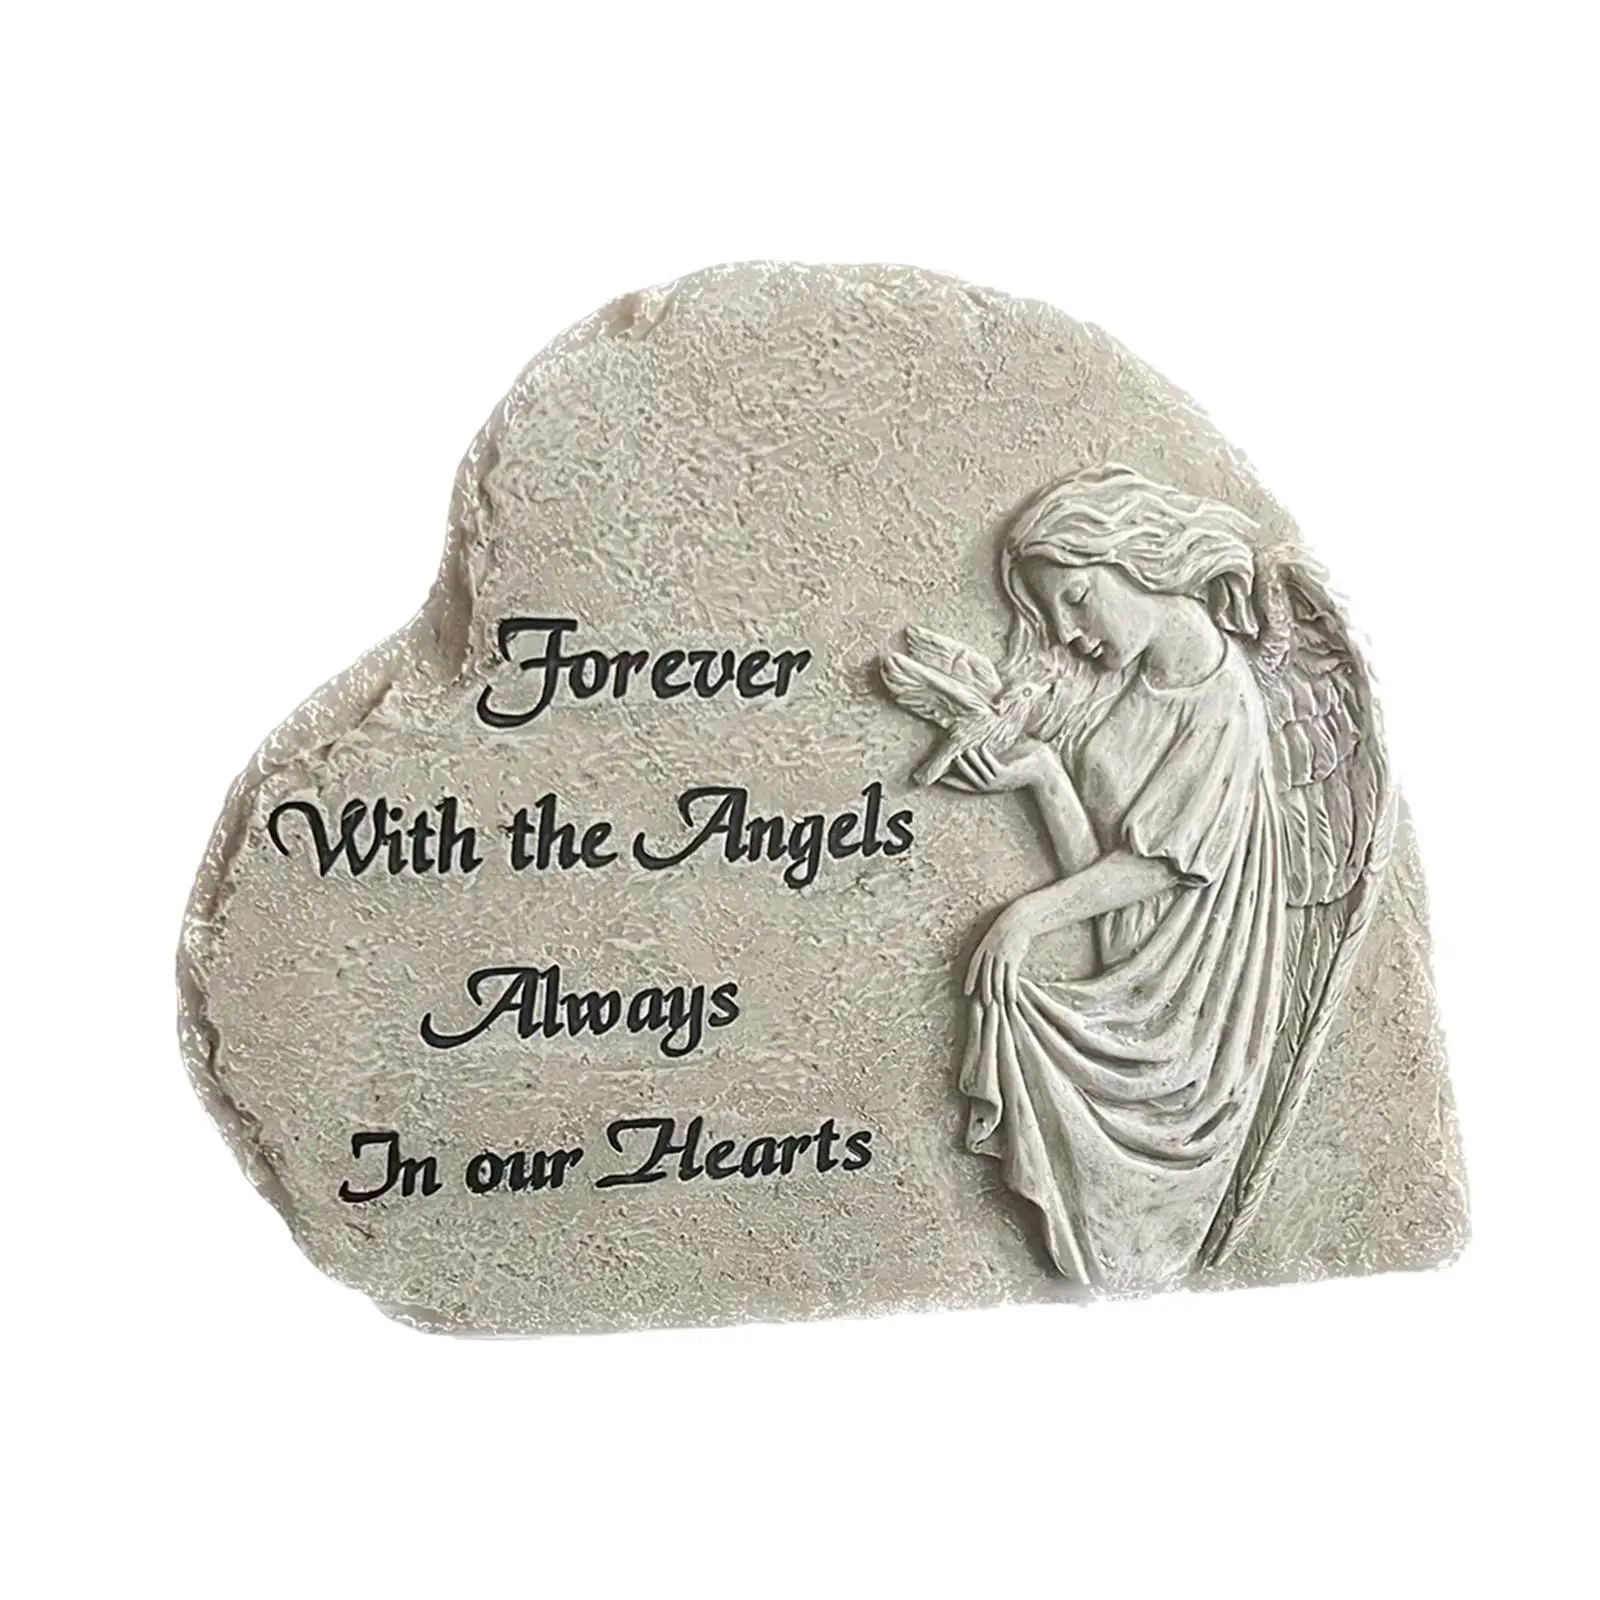 Angel Sculpture Decorations Dog Grave Marker for Outside Outdoors Decor